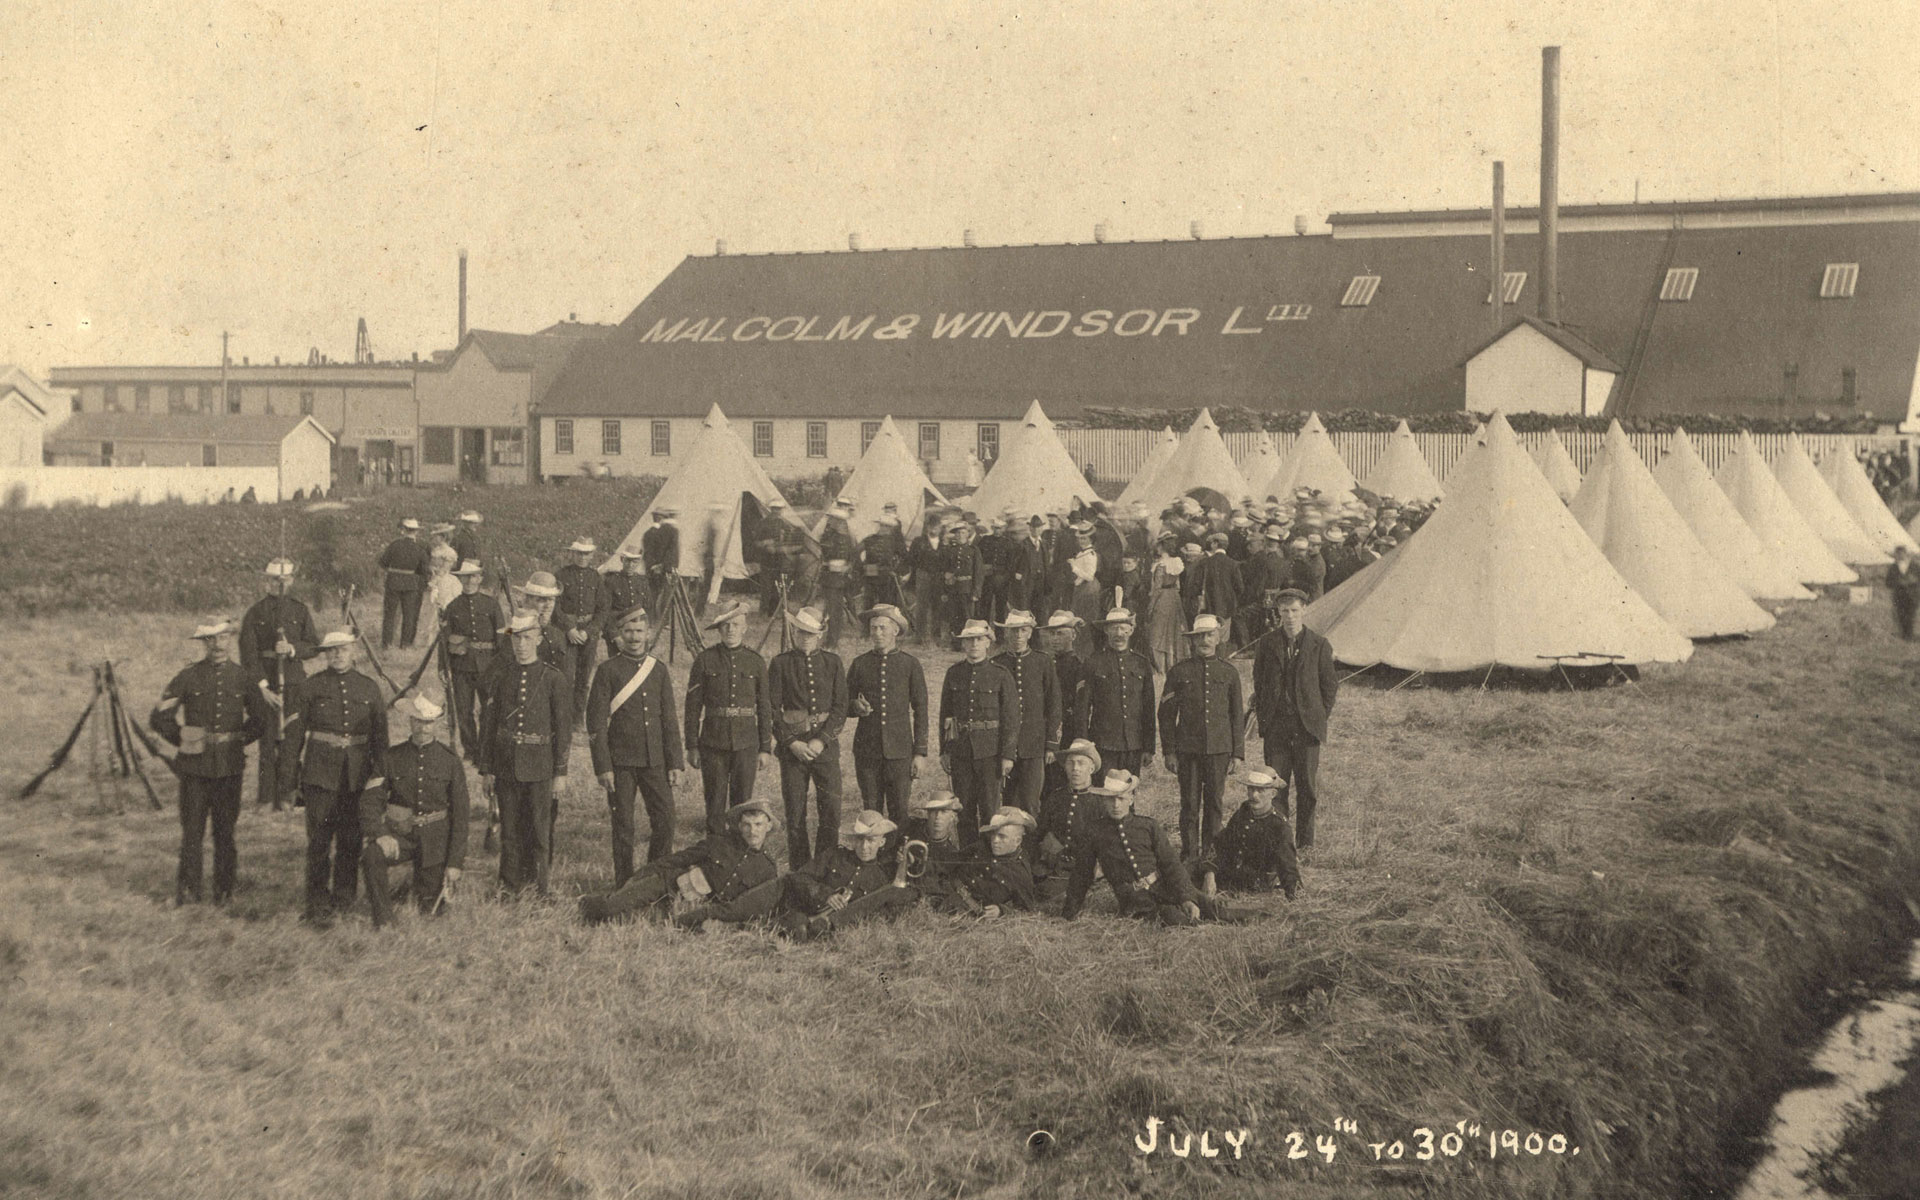 Soldiers stand together in front of tents on a grassy field. A building is in the background with Malcolm and Windsor Ltd. in large letters on the roof.